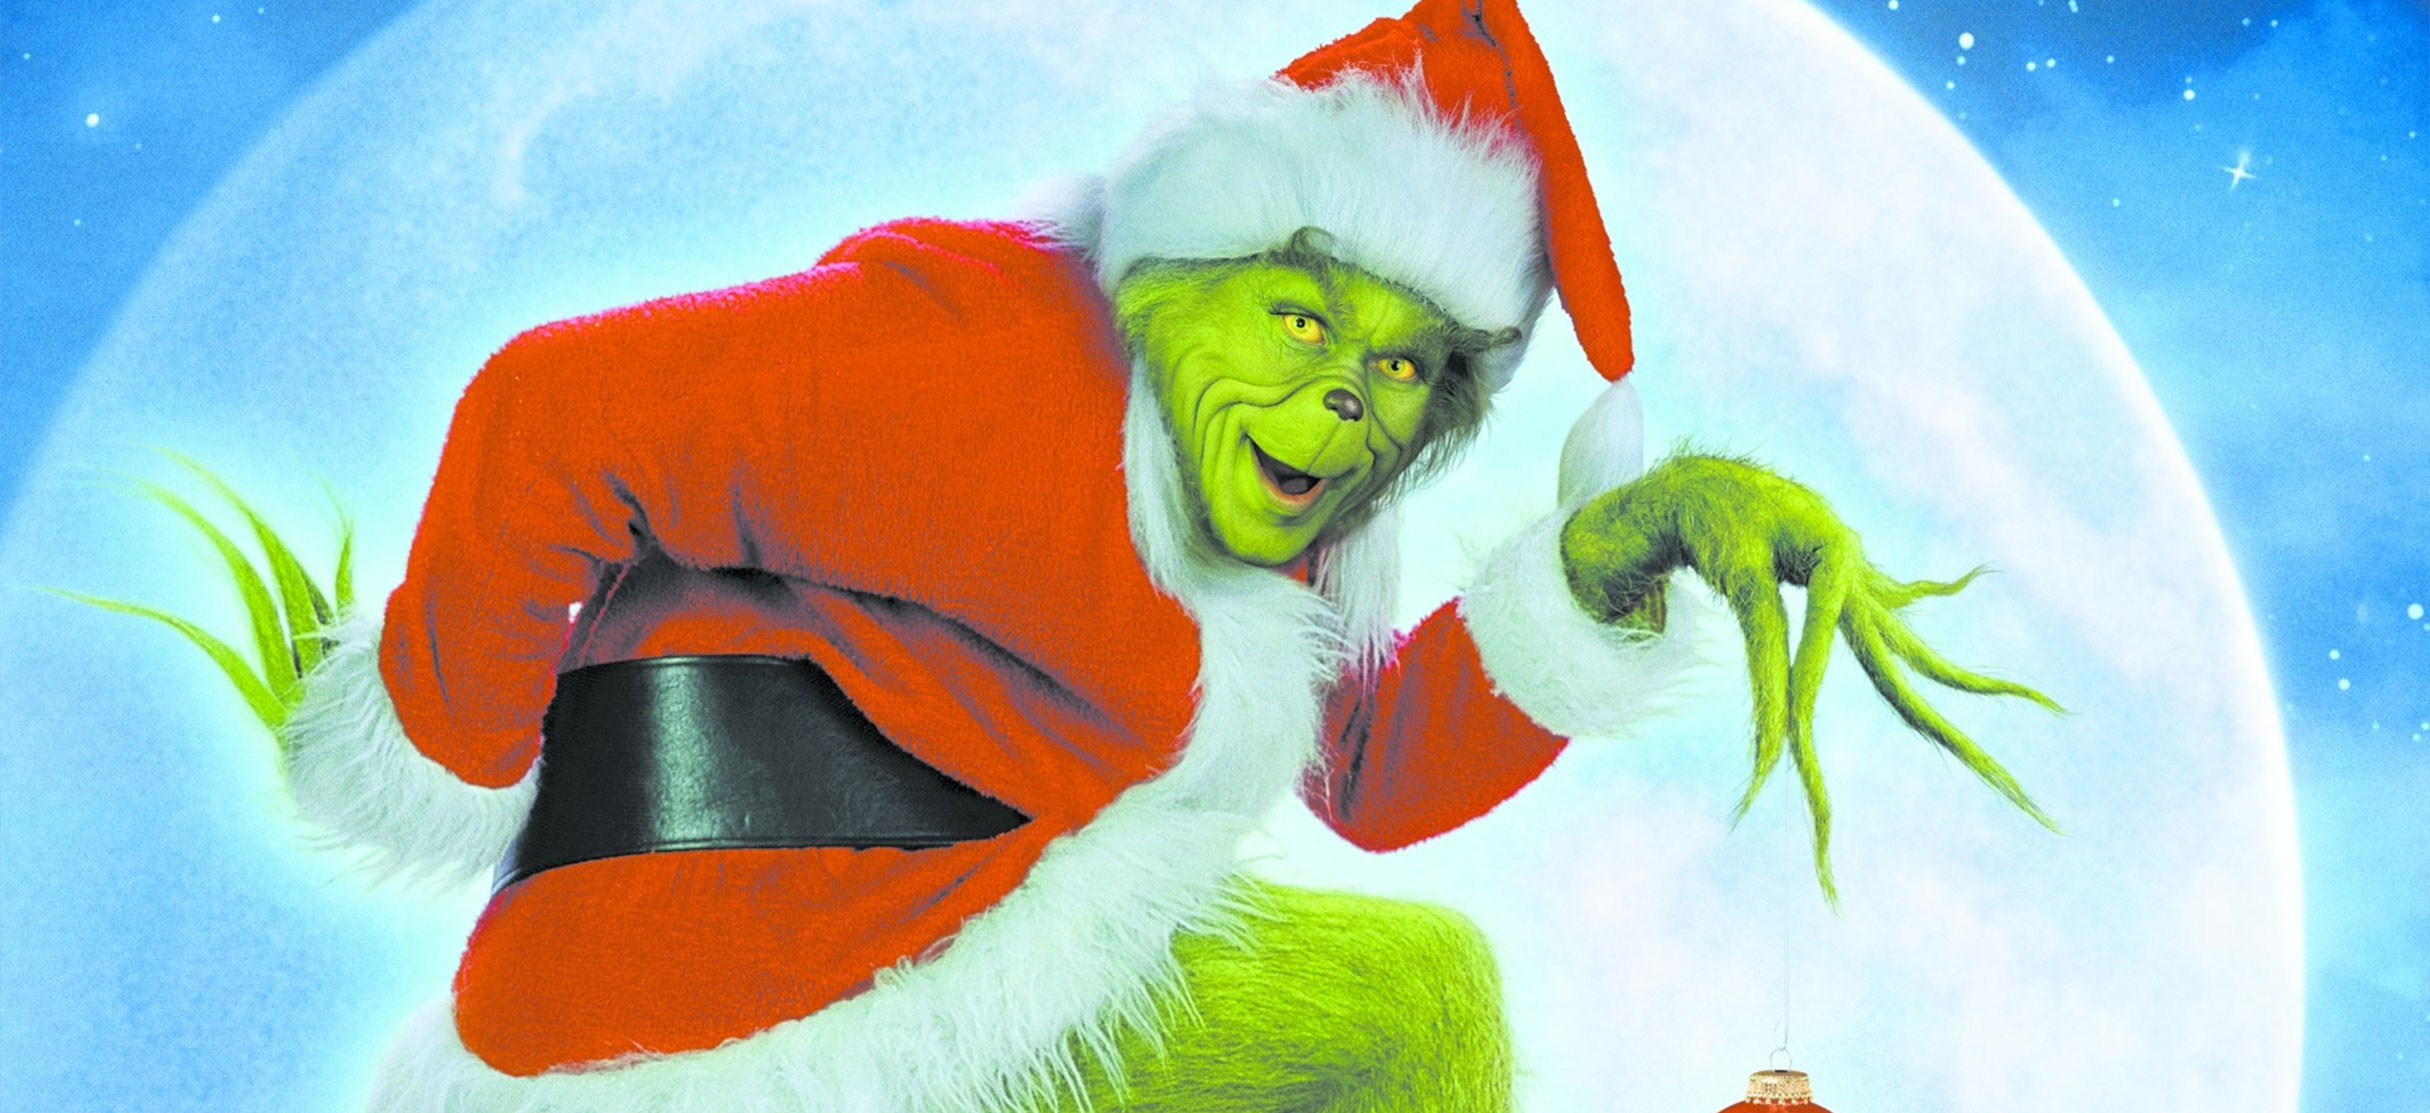 Background image for Movies On The Lawn: How The Grinch Stole Christmas